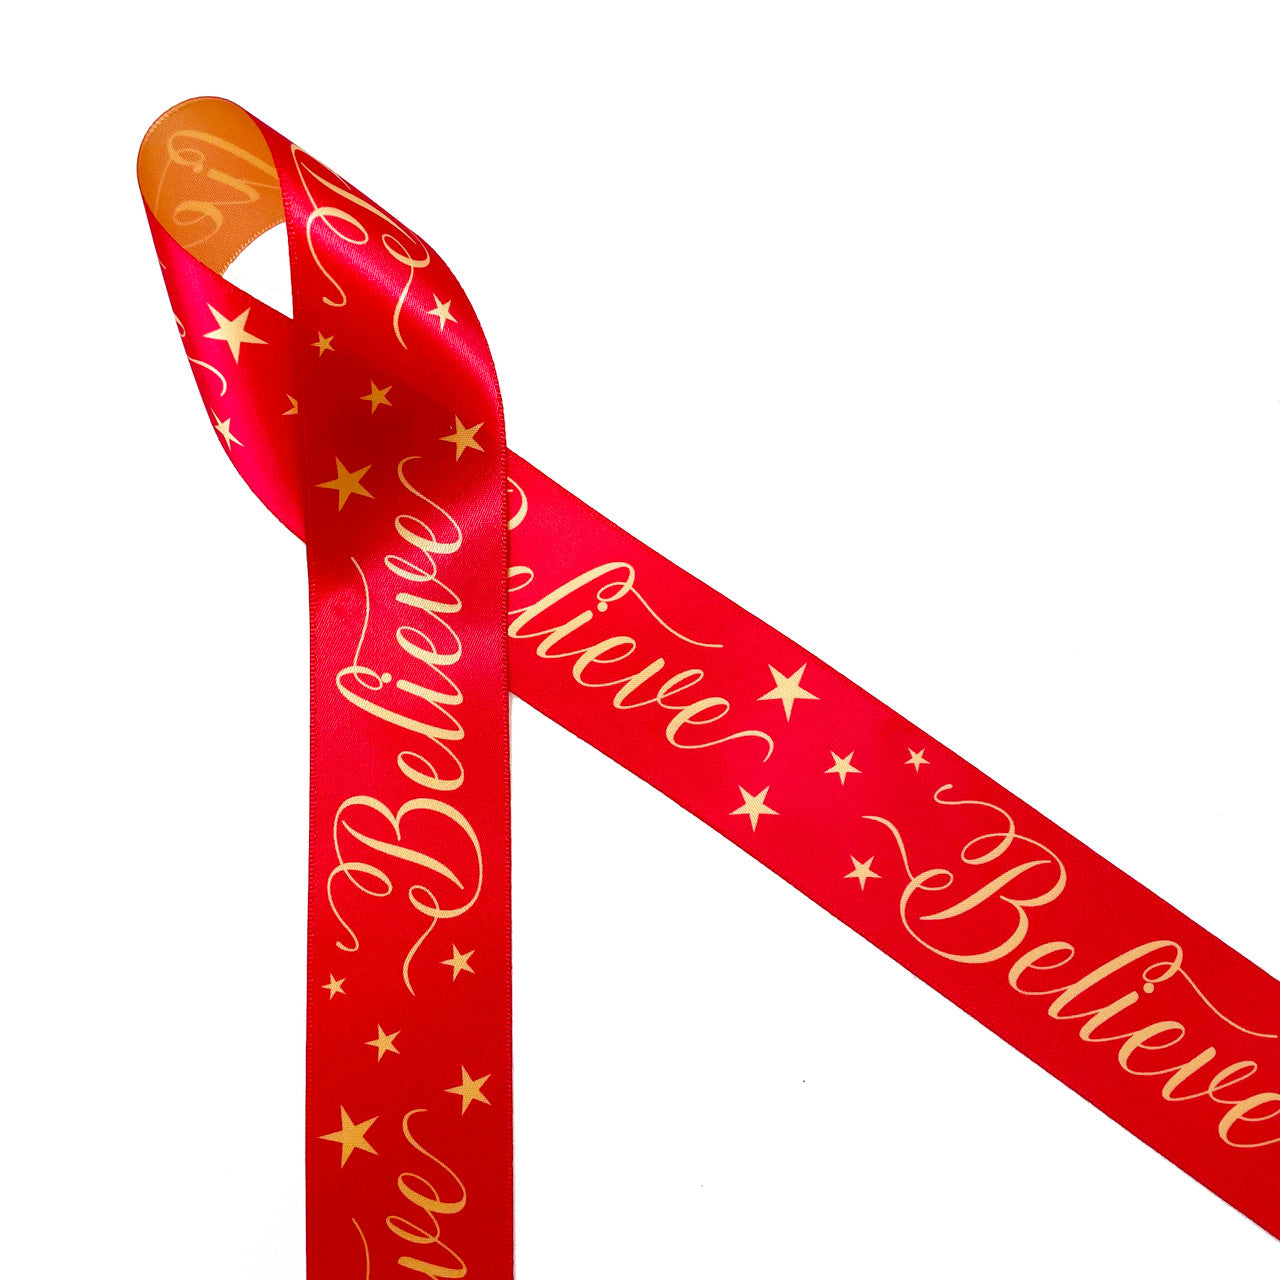 Believe in the wonder and magic of the Holiday season. Believe in gold script with gold stars on a red background printed on 1.5" yellow gold ribbon is a reflection of the Holiday spirit. This gorgeous ribbon is ideal for gift wrap, gift baskets, Holiday decor, tree trimming, wreath making, floral design, Holiday crafts, sewing and quilting projects. All our ribbon is designed and printed in the USA